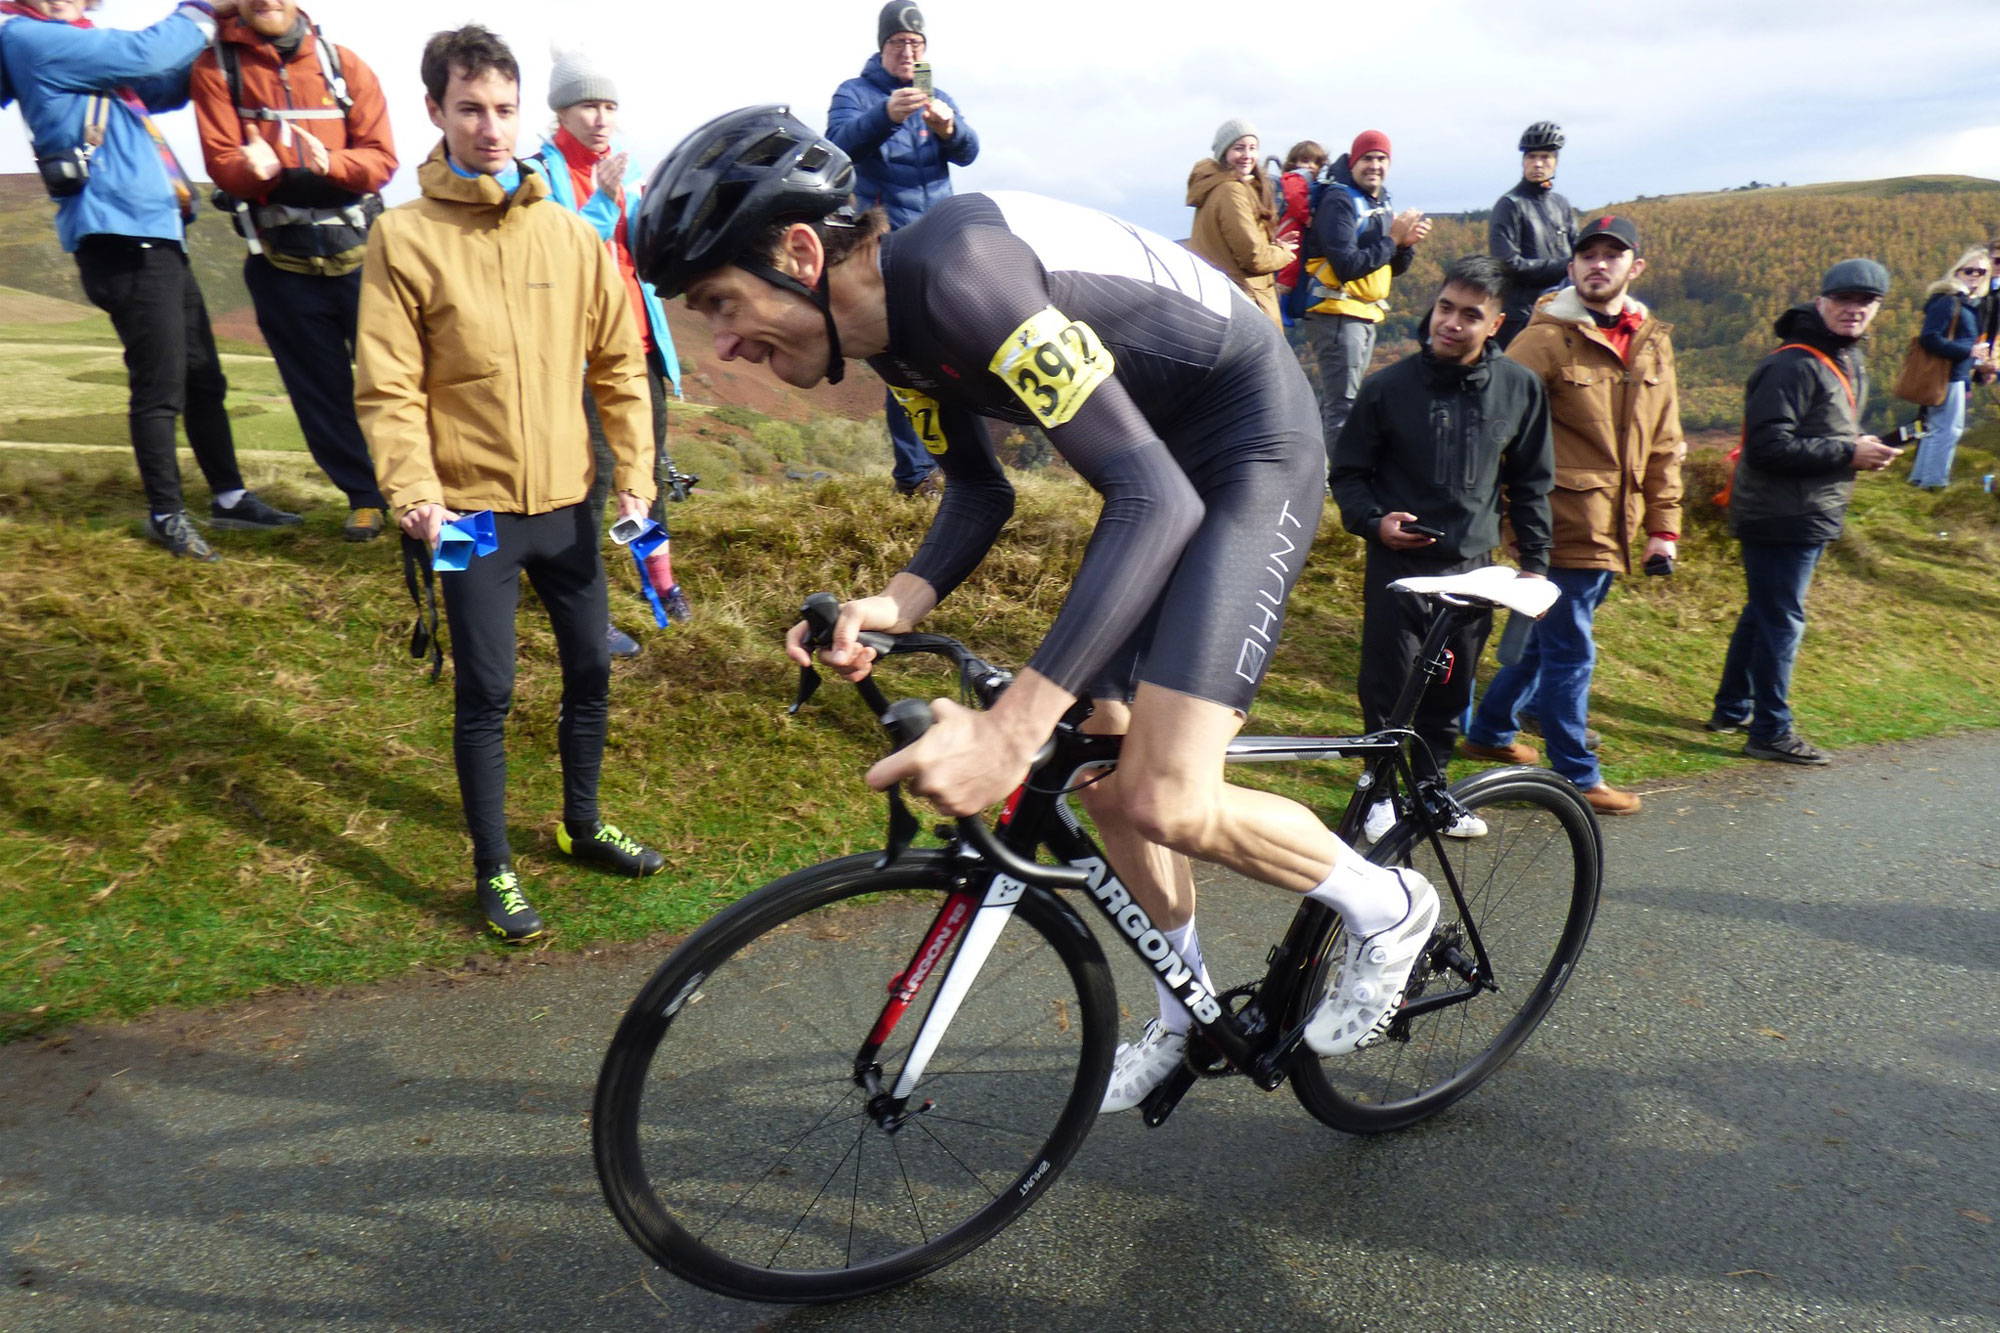 Rich competing at a hill climb event